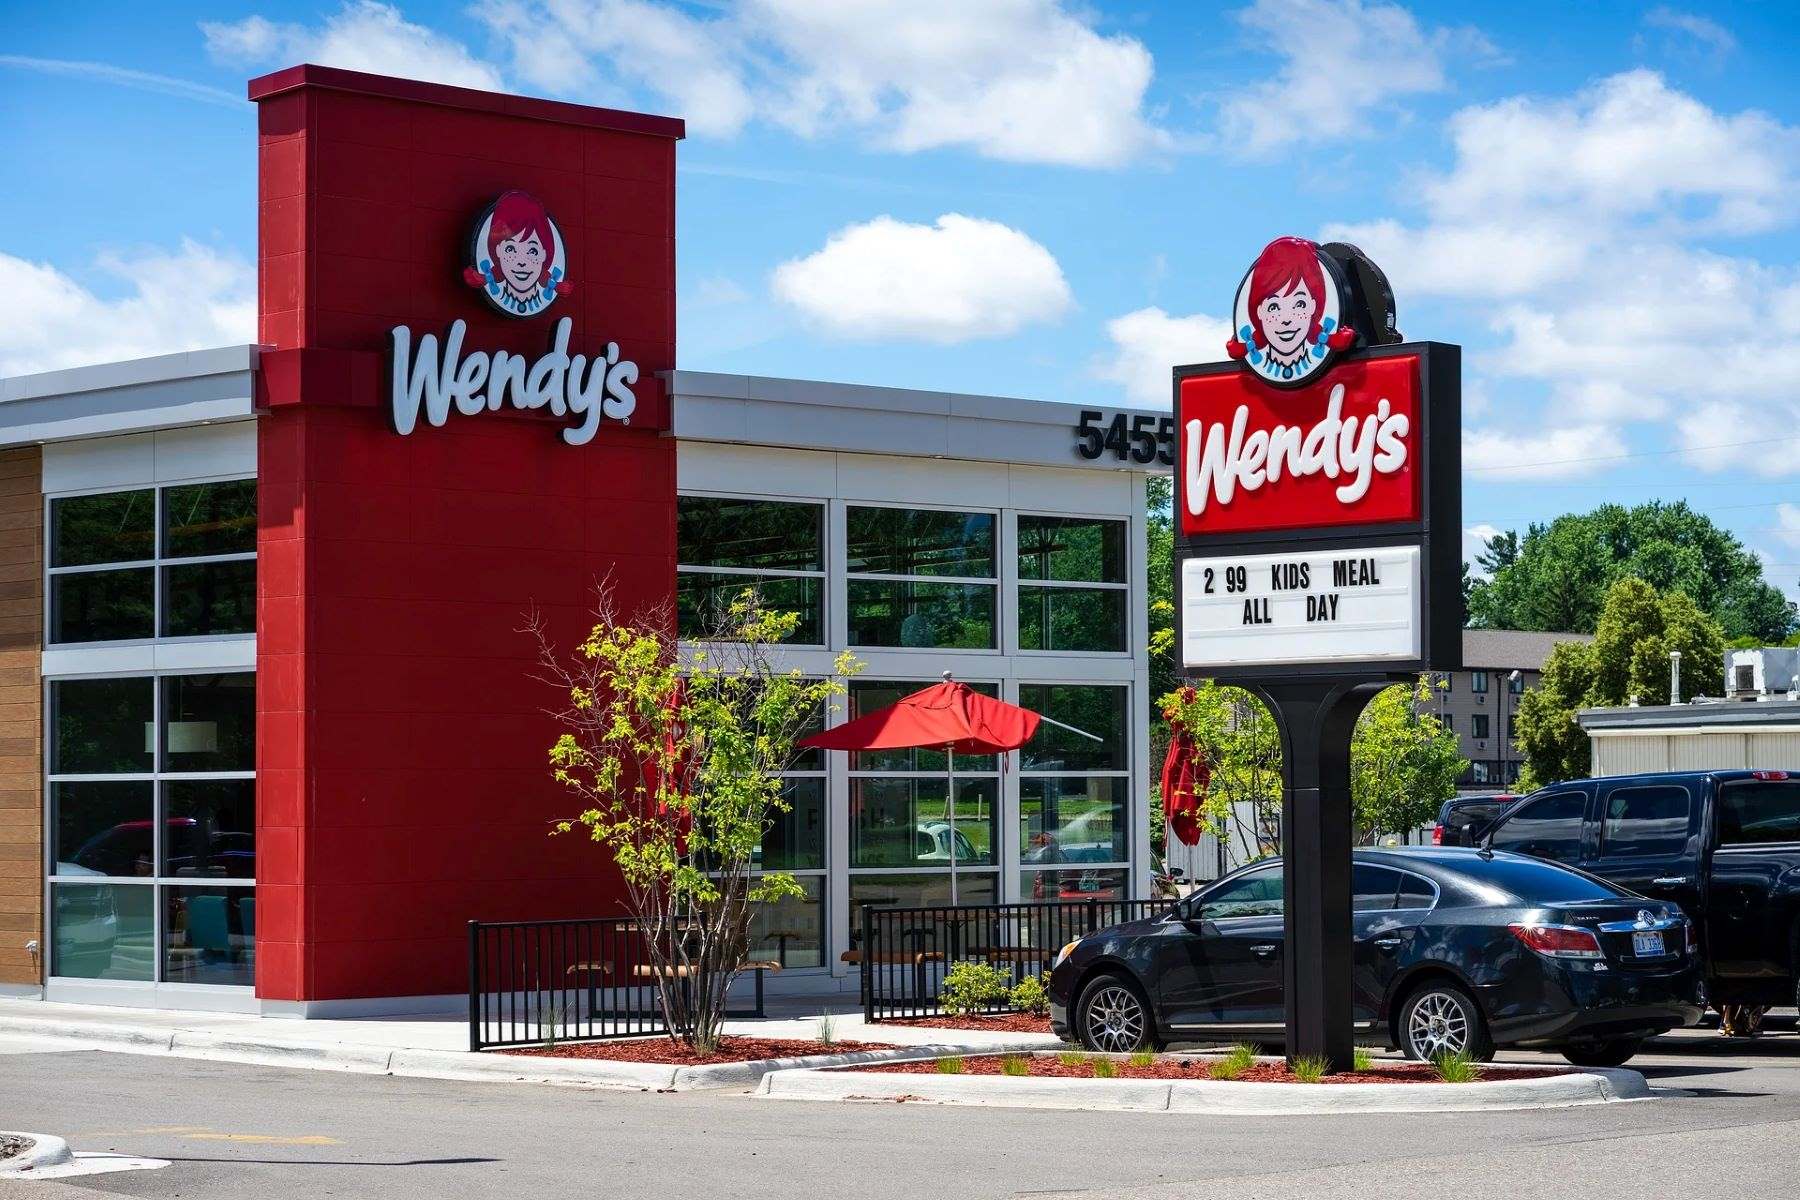 Wendy's World Redhead Day Promotion: Boosting Brand Image And Customer Loyalty